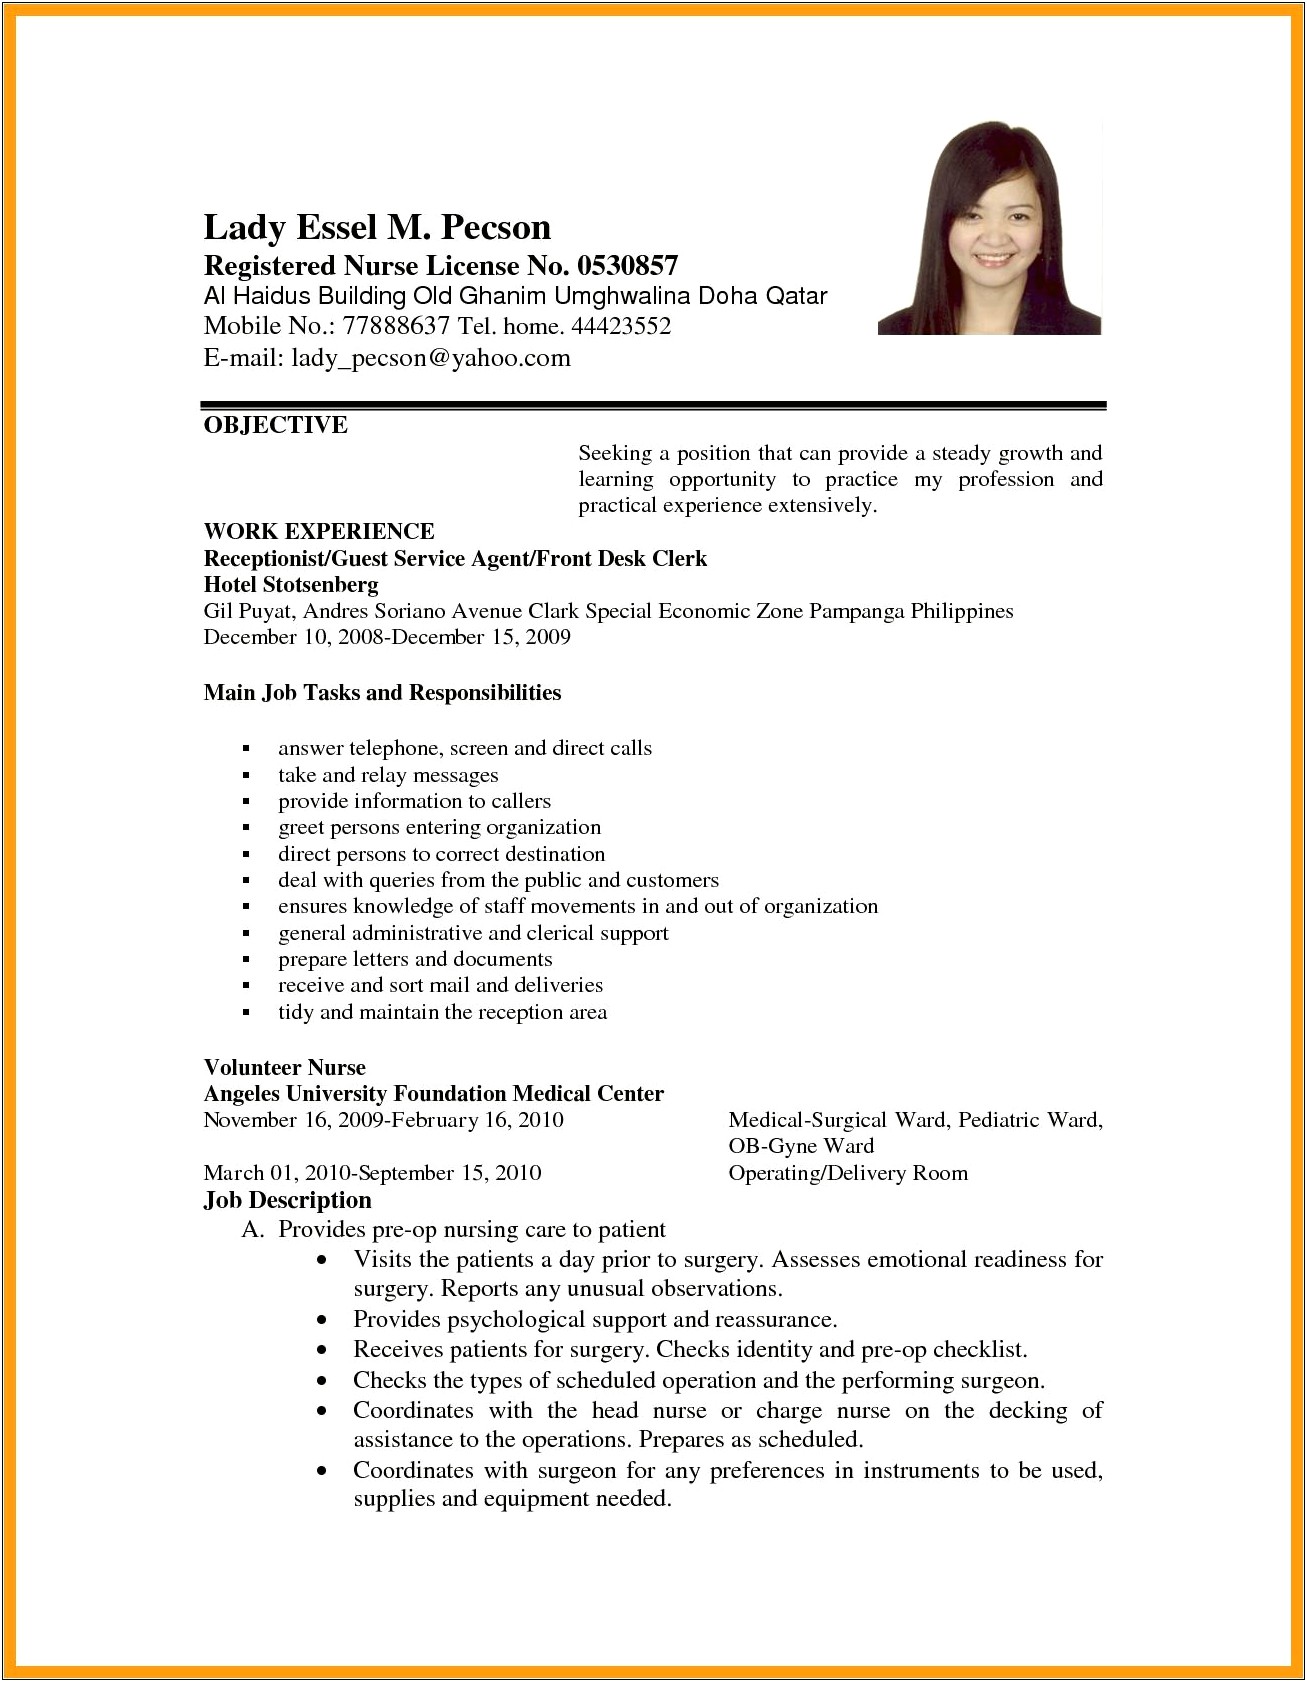 Walk Me Through Your Resume For Intership Examples